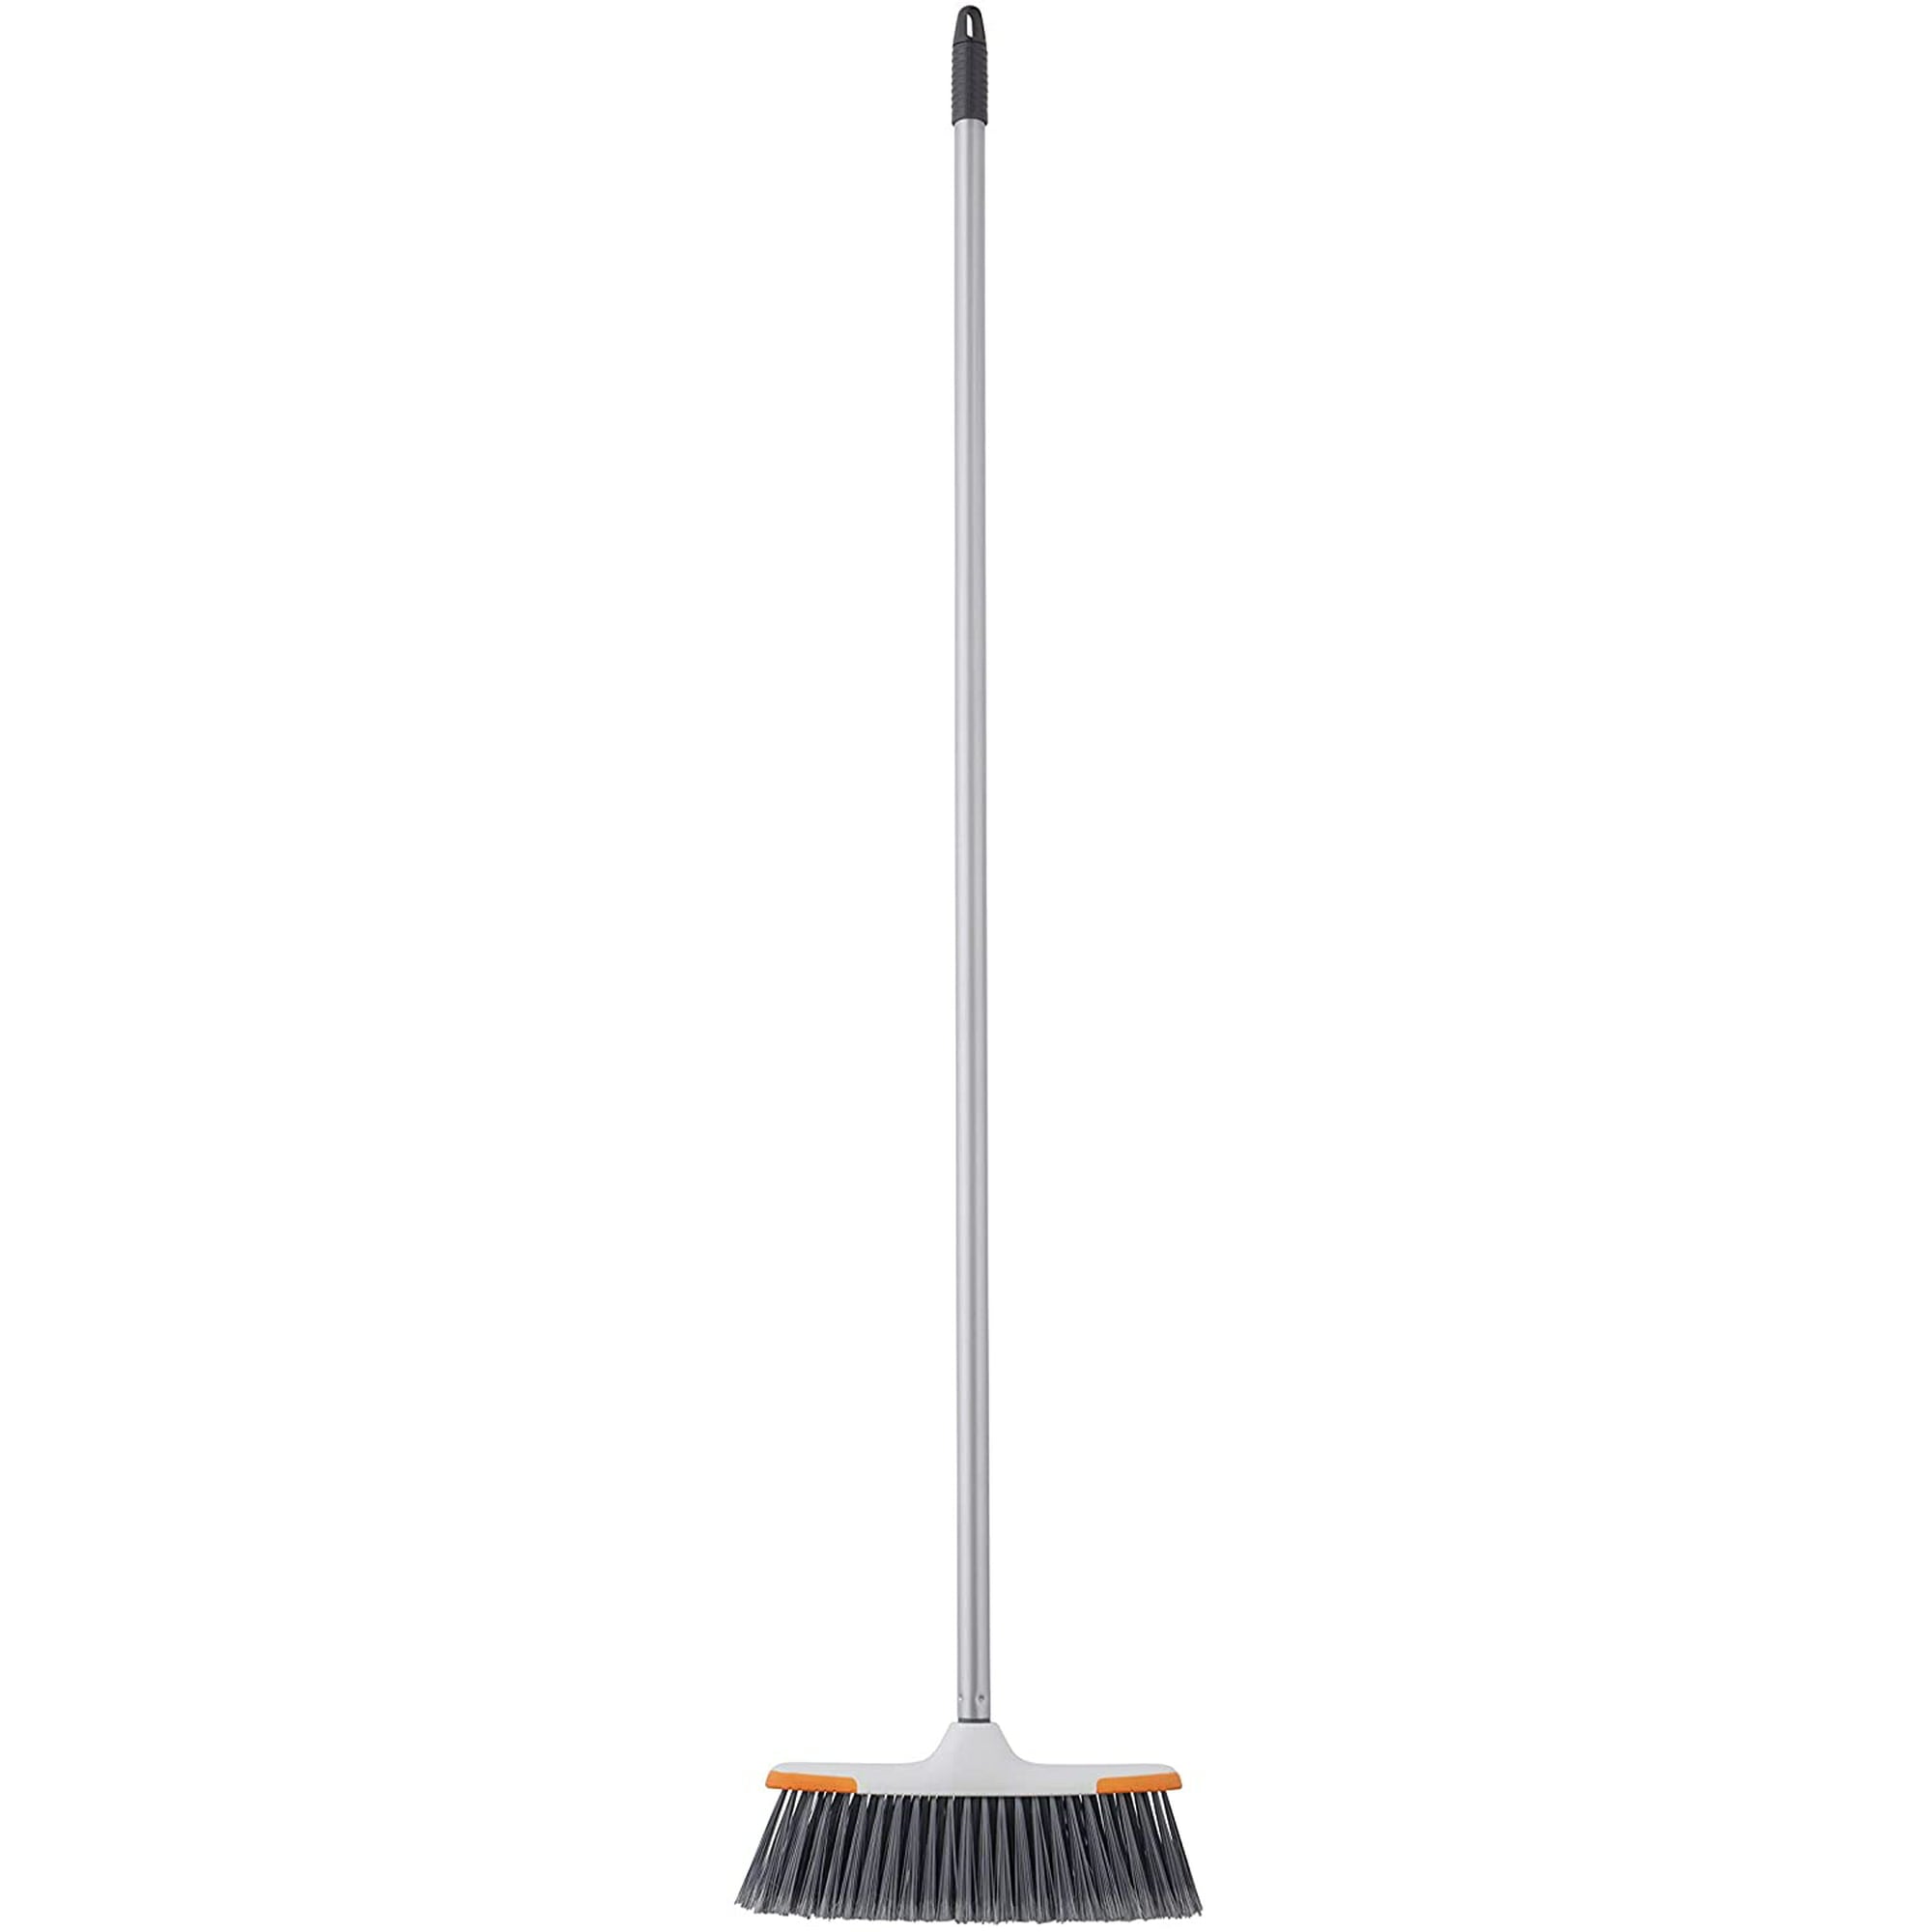 Superio Brand Lightweight Grey Essential Household Broom with Metal Handle